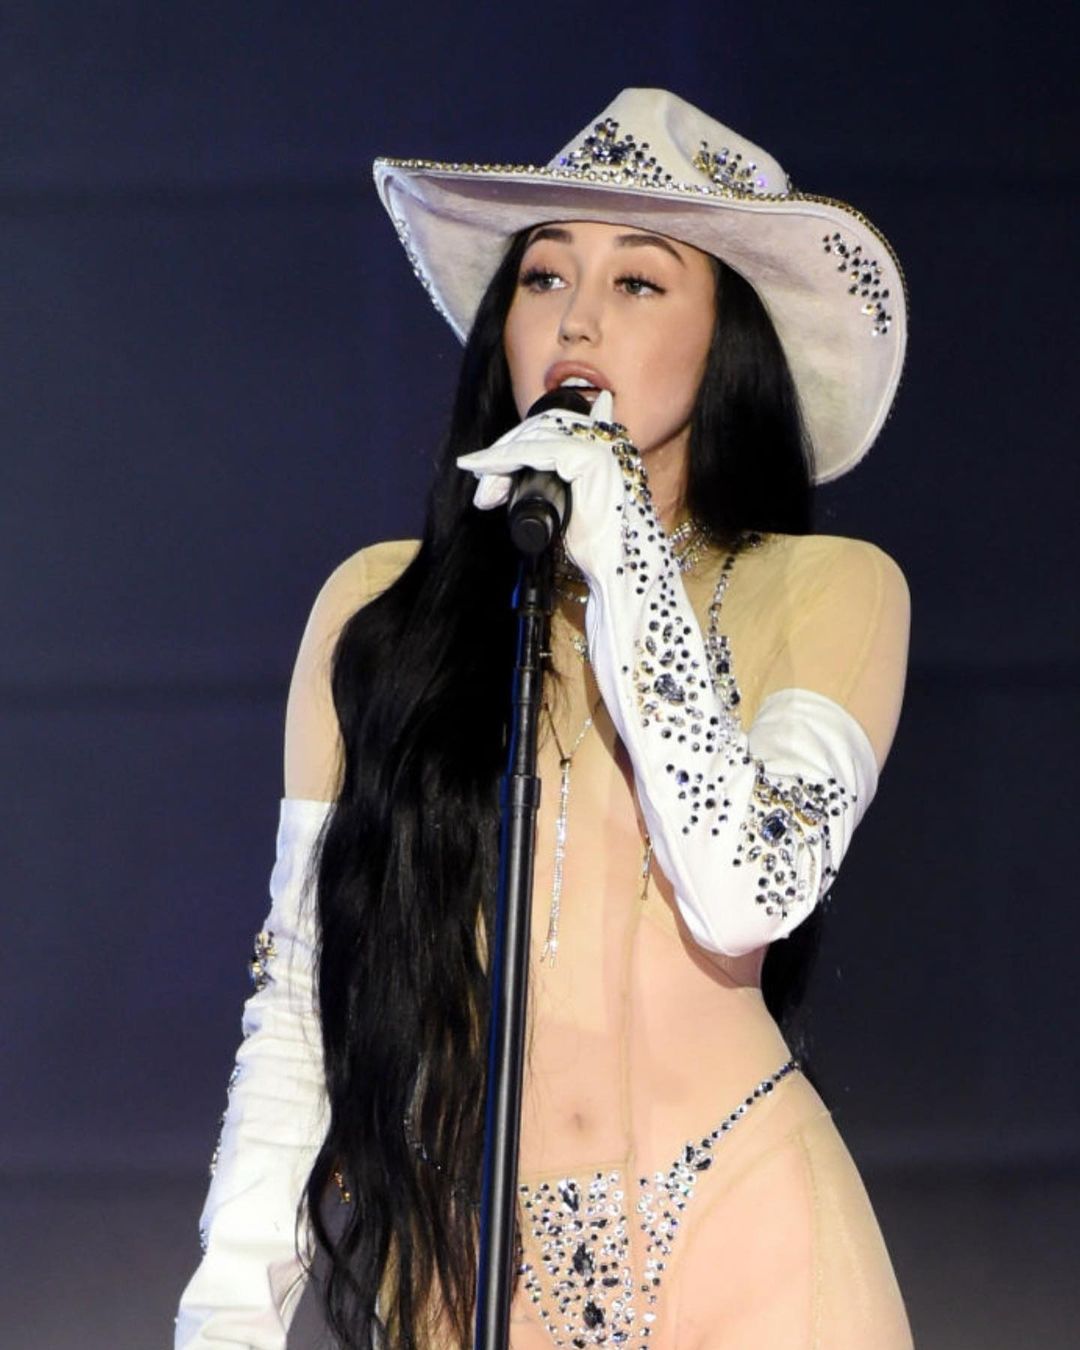 Noah Cyrus Strips Down on Stage! - Photo 3